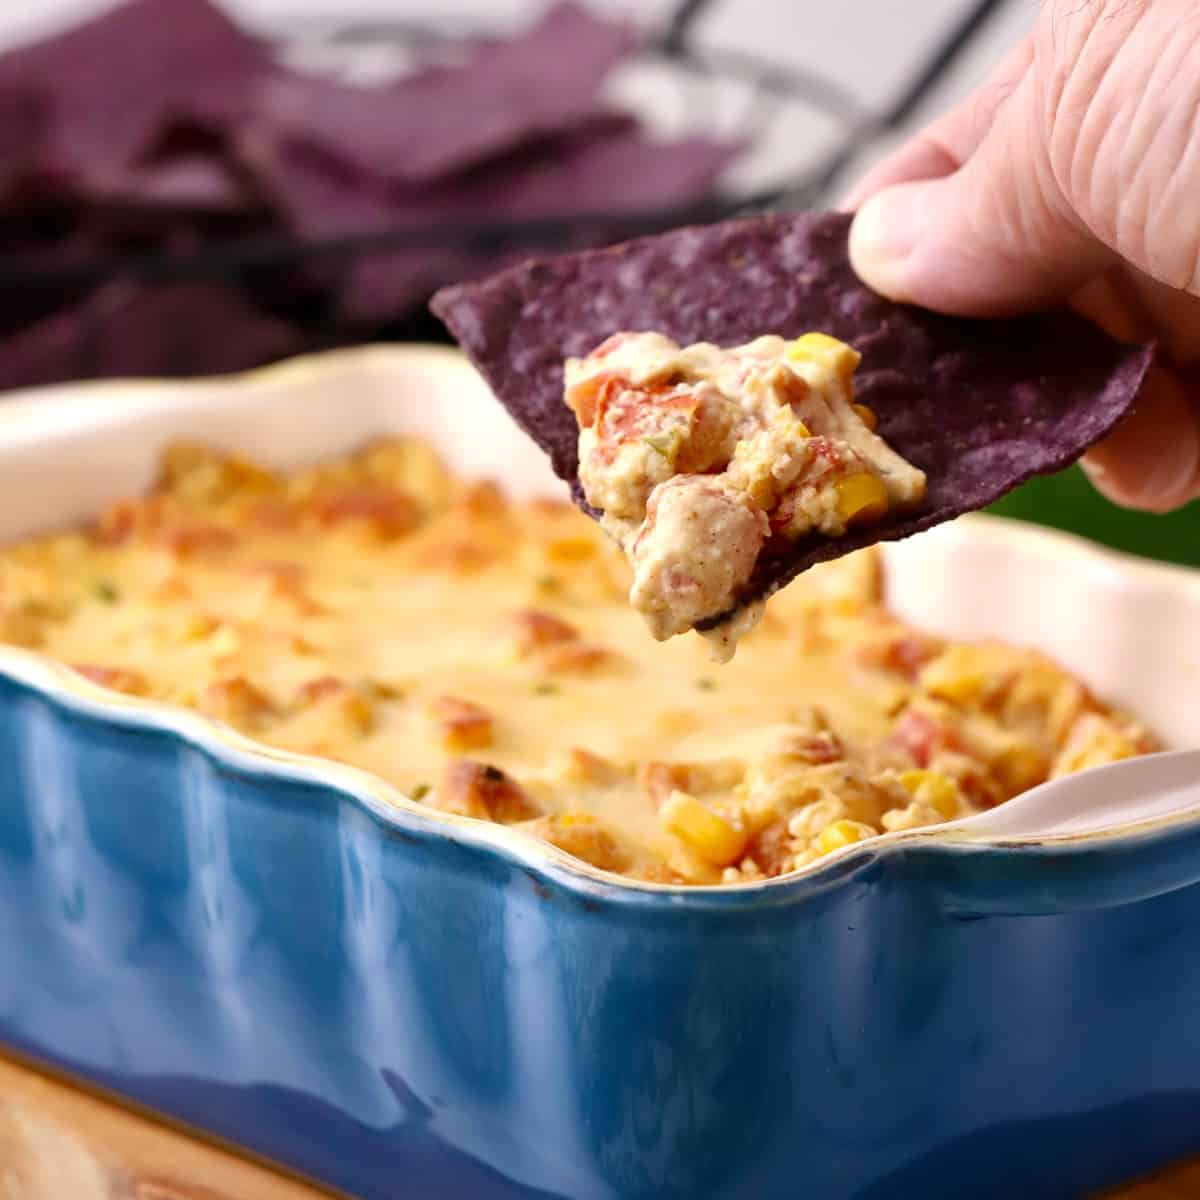 Using a blue corn chip to scoop a serving of hot corn dip with cream cheese.